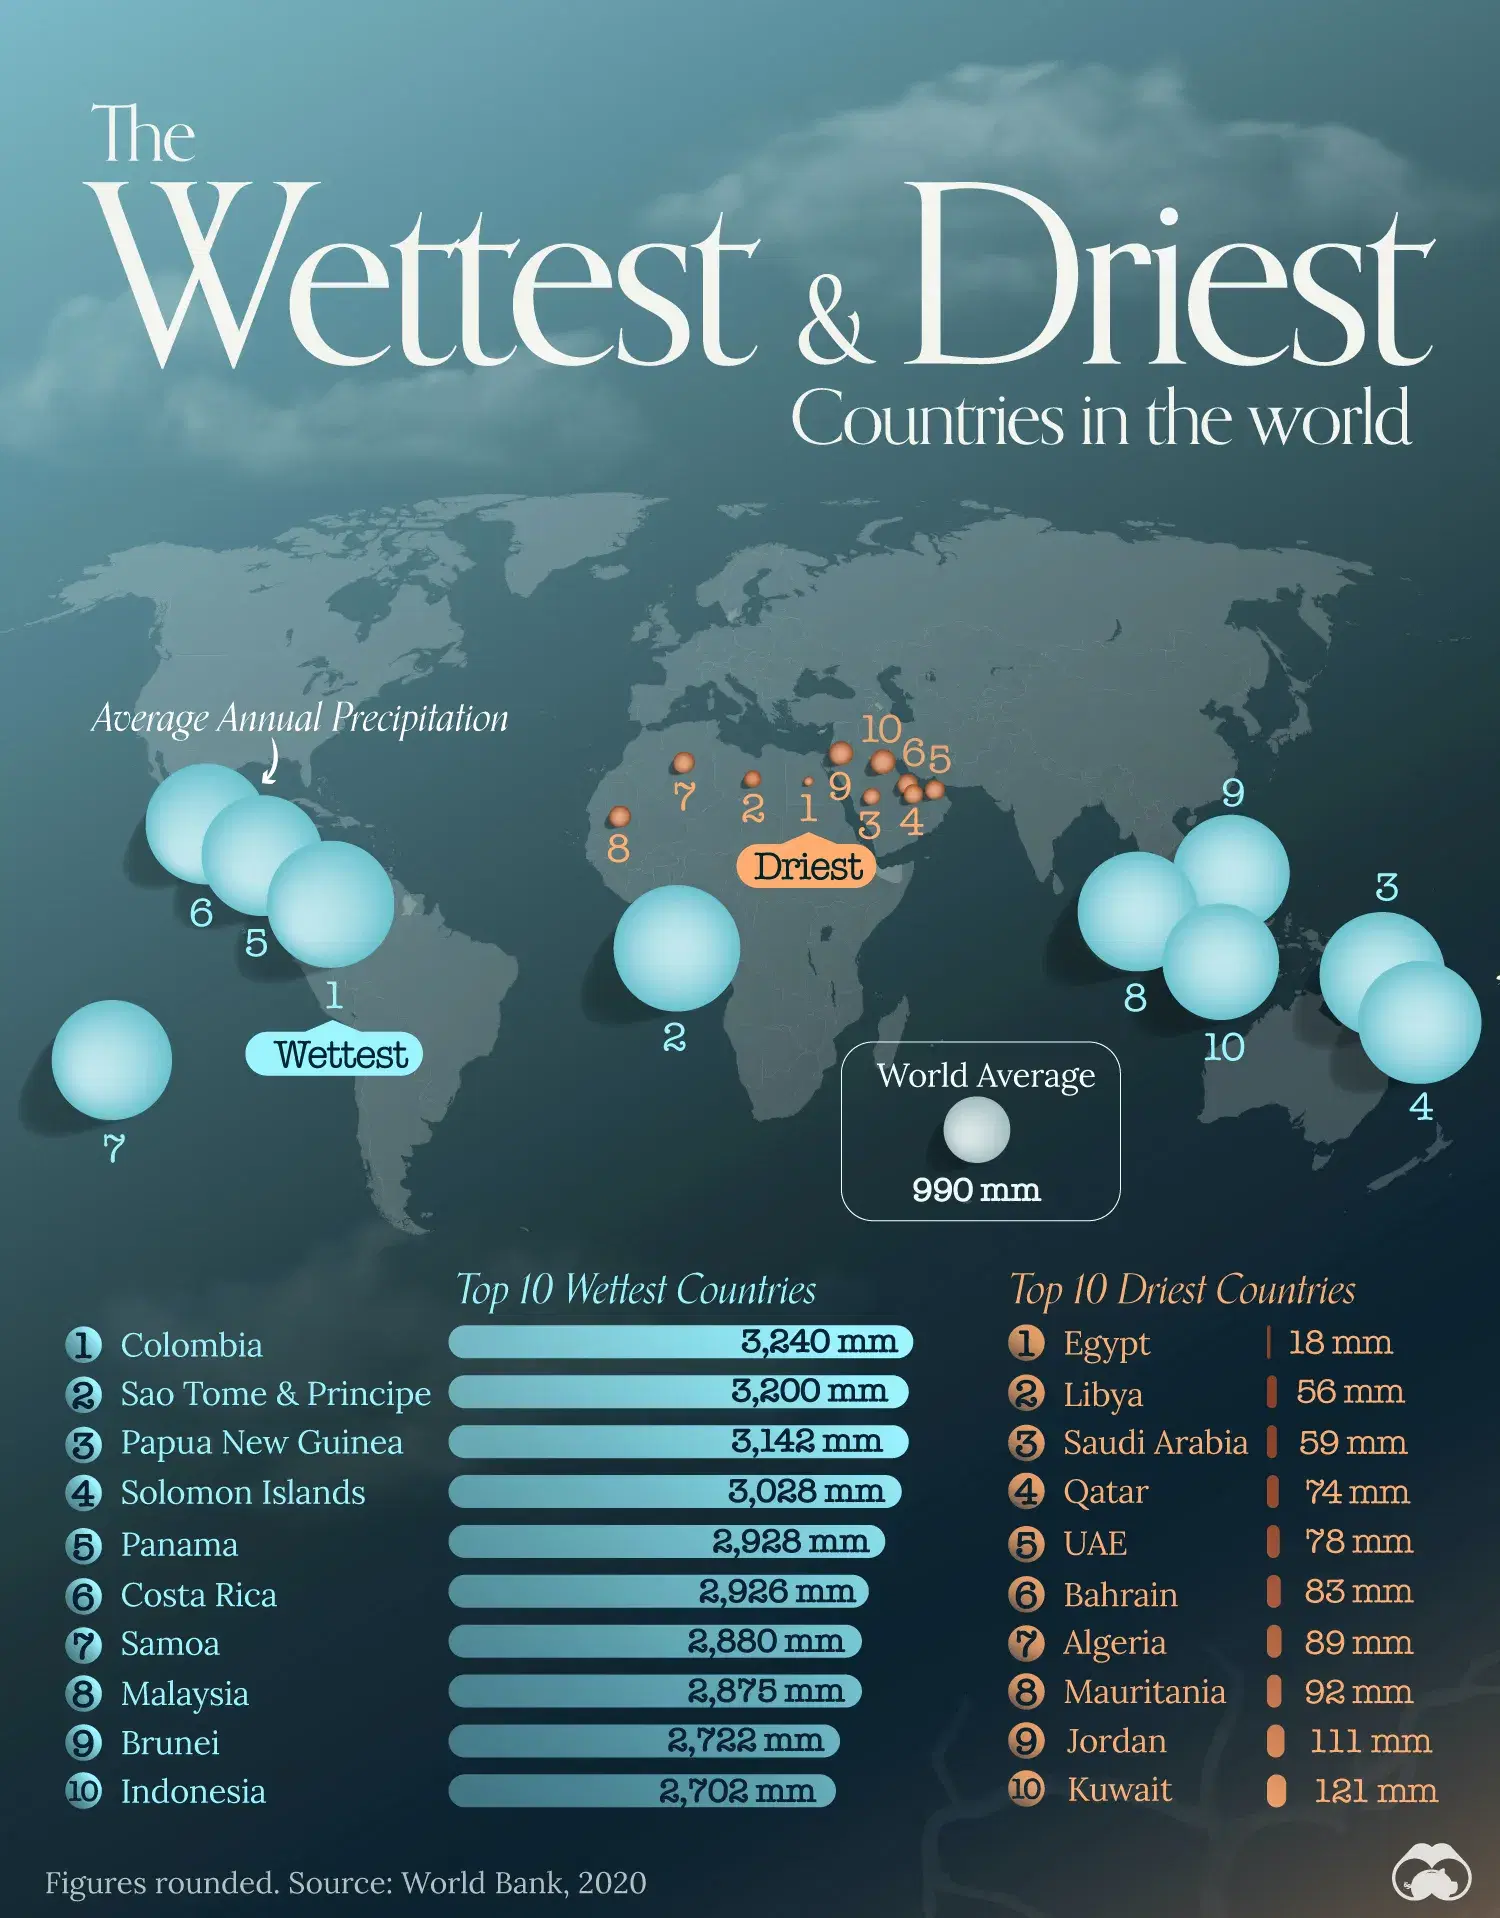 🇨🇴 Colombia is the Wettest Country on Earth, Egypt is the Driest